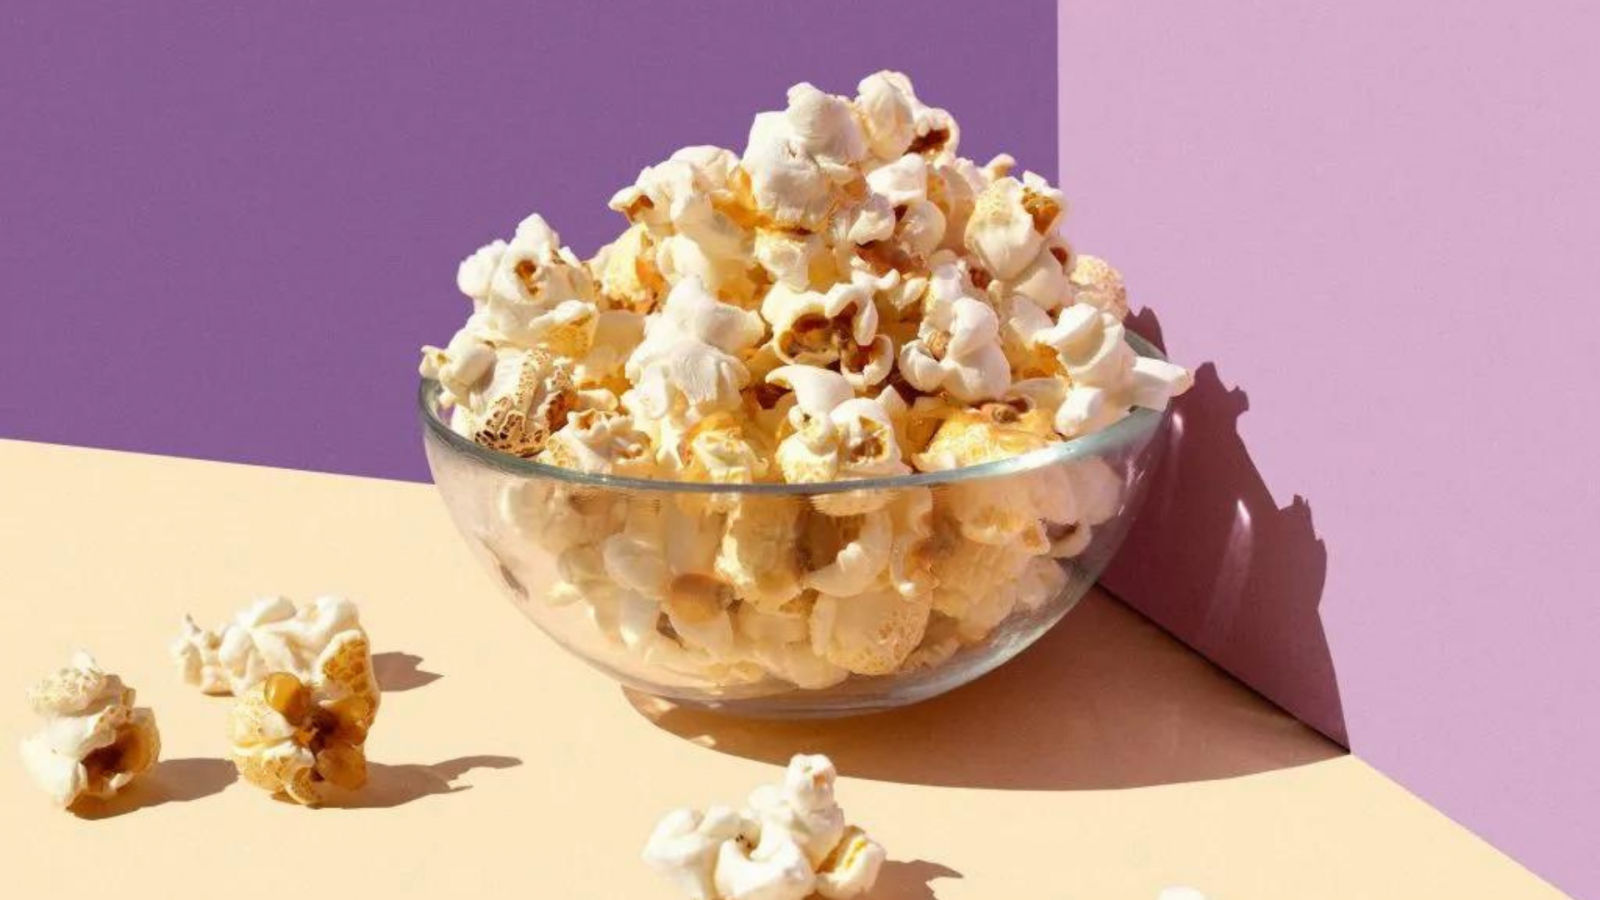 Real Talk: Is popcorn healthy? Here’s what dietitians think